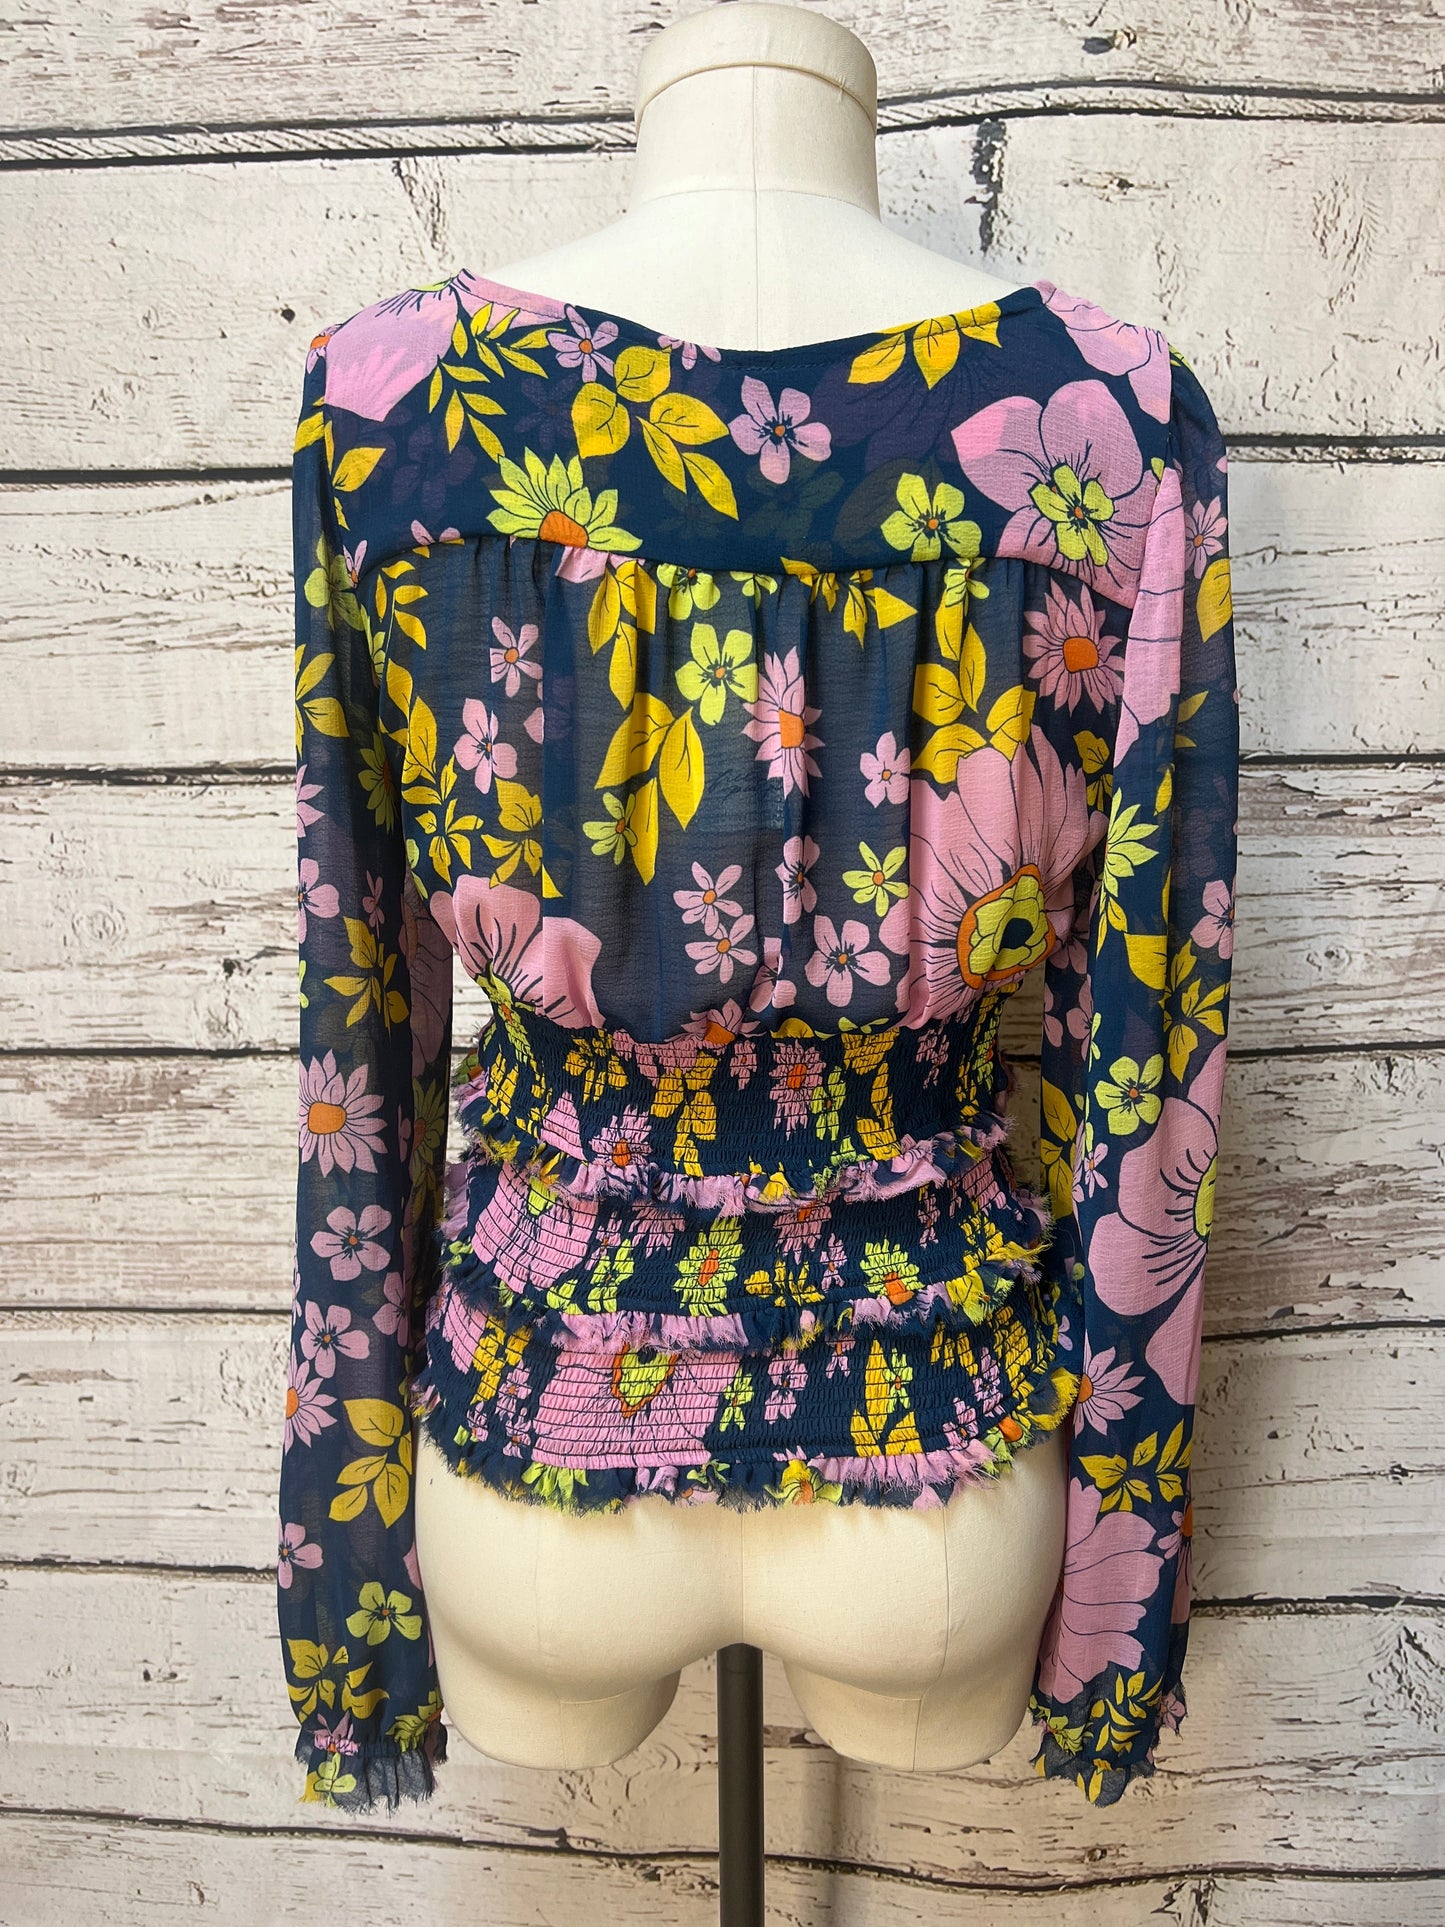 Floral Top Long Sleeve Free People, Size M